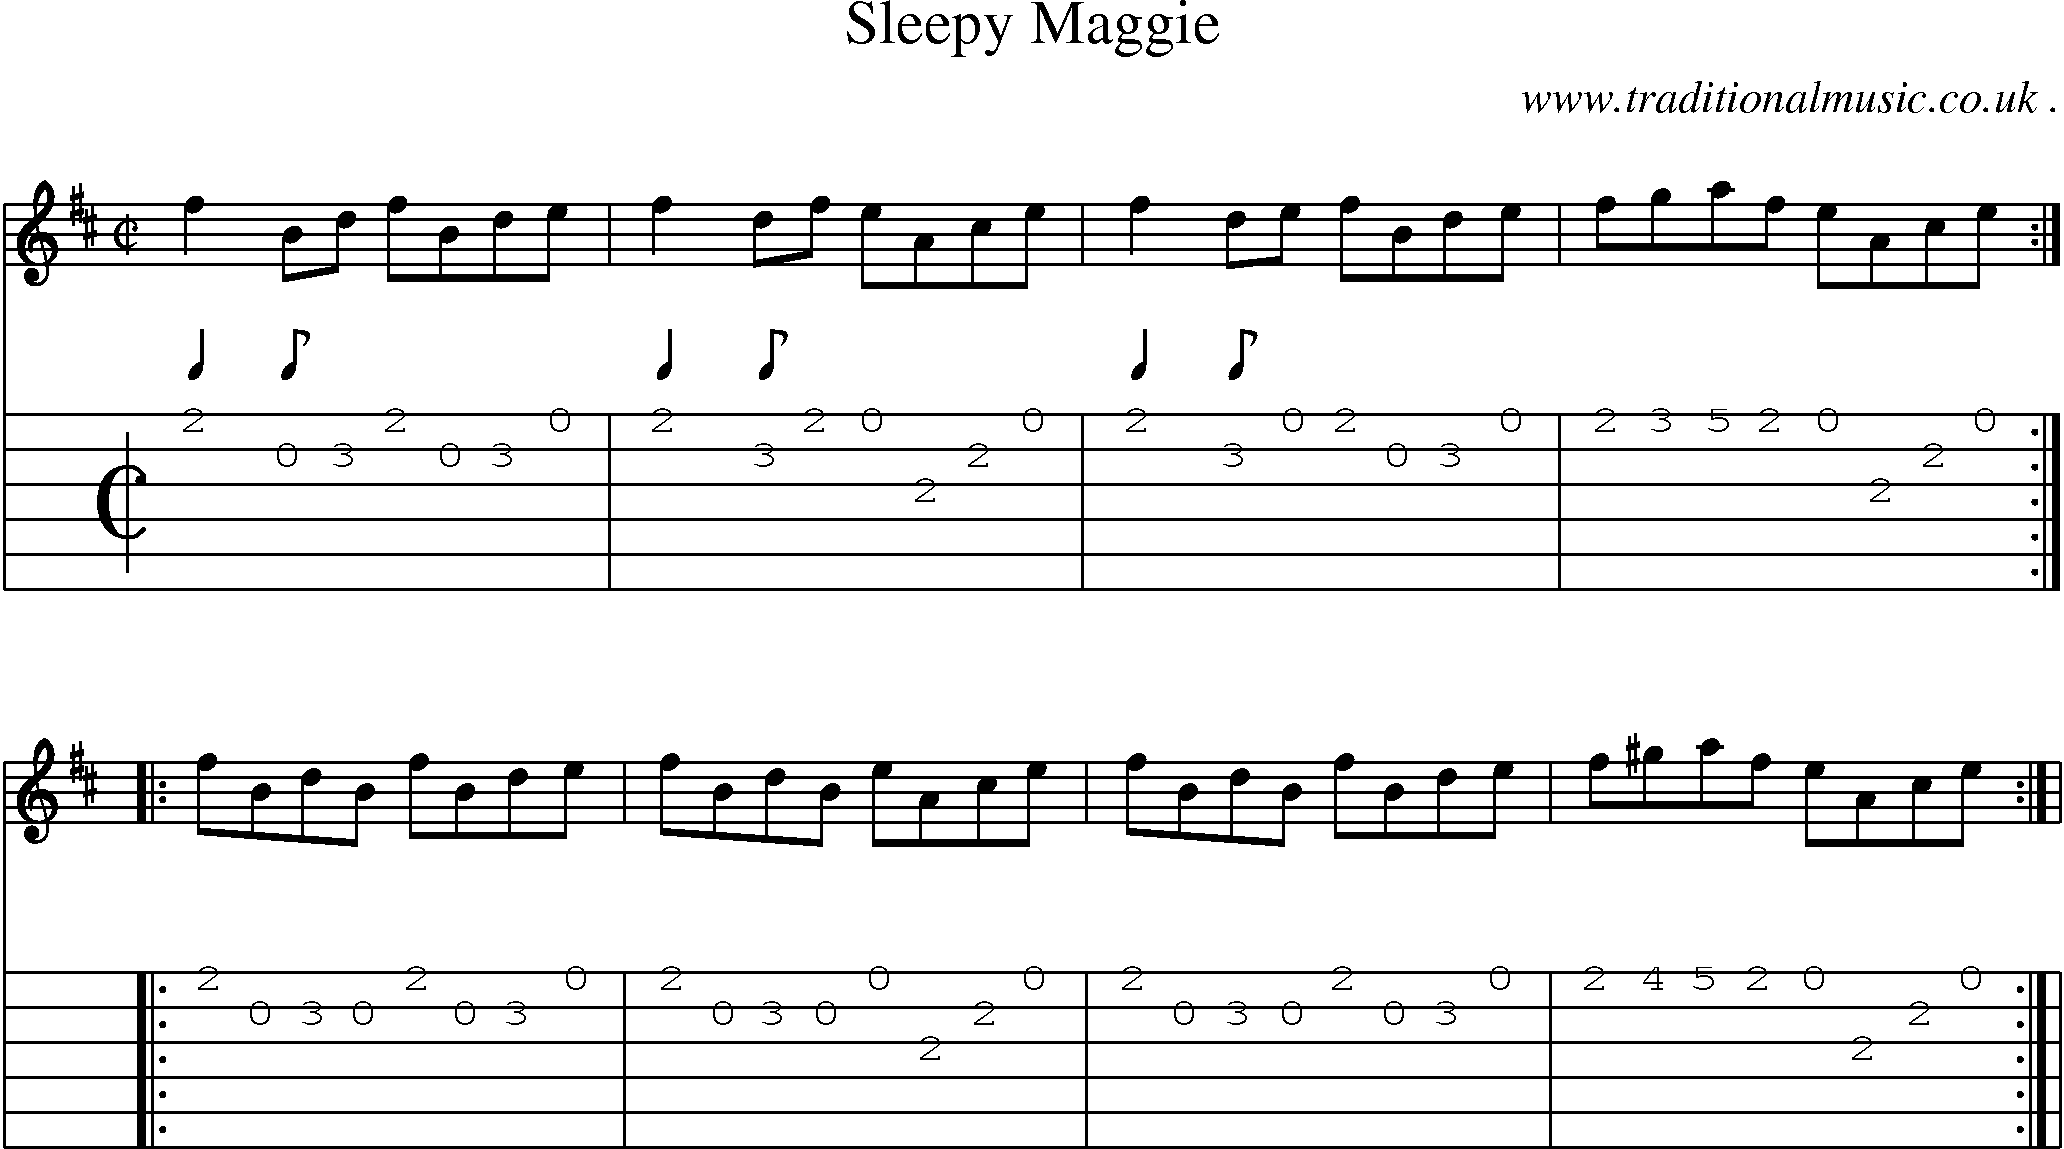 Sheet-Music and Guitar Tabs for Sleepy Maggie